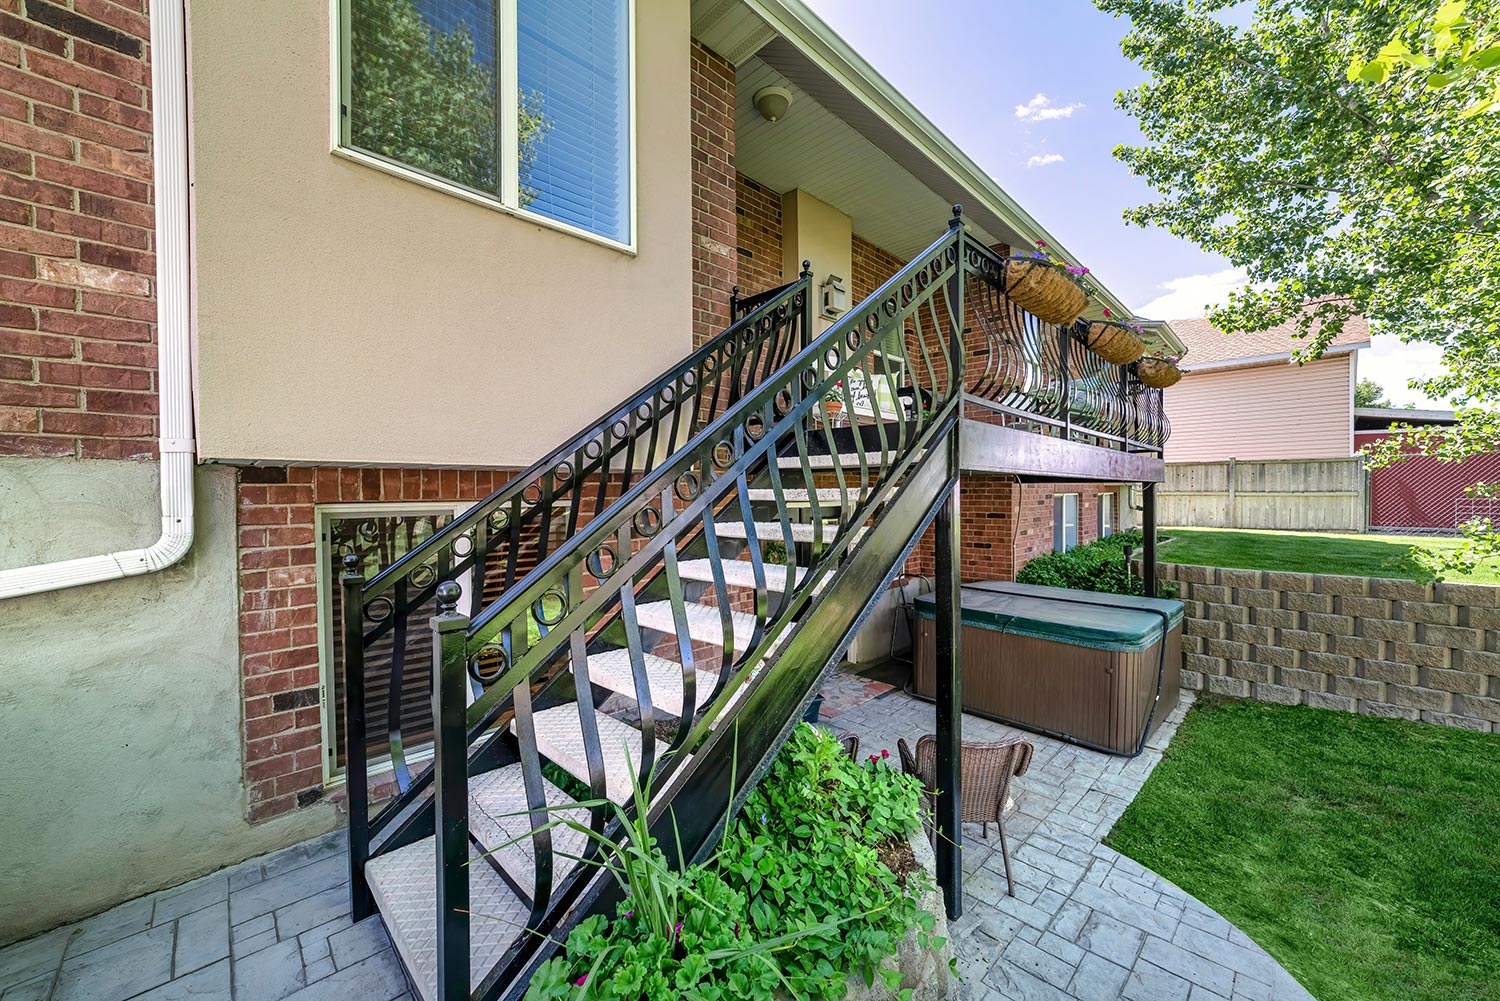 Home exterior with red bricks and staircase with metal railings